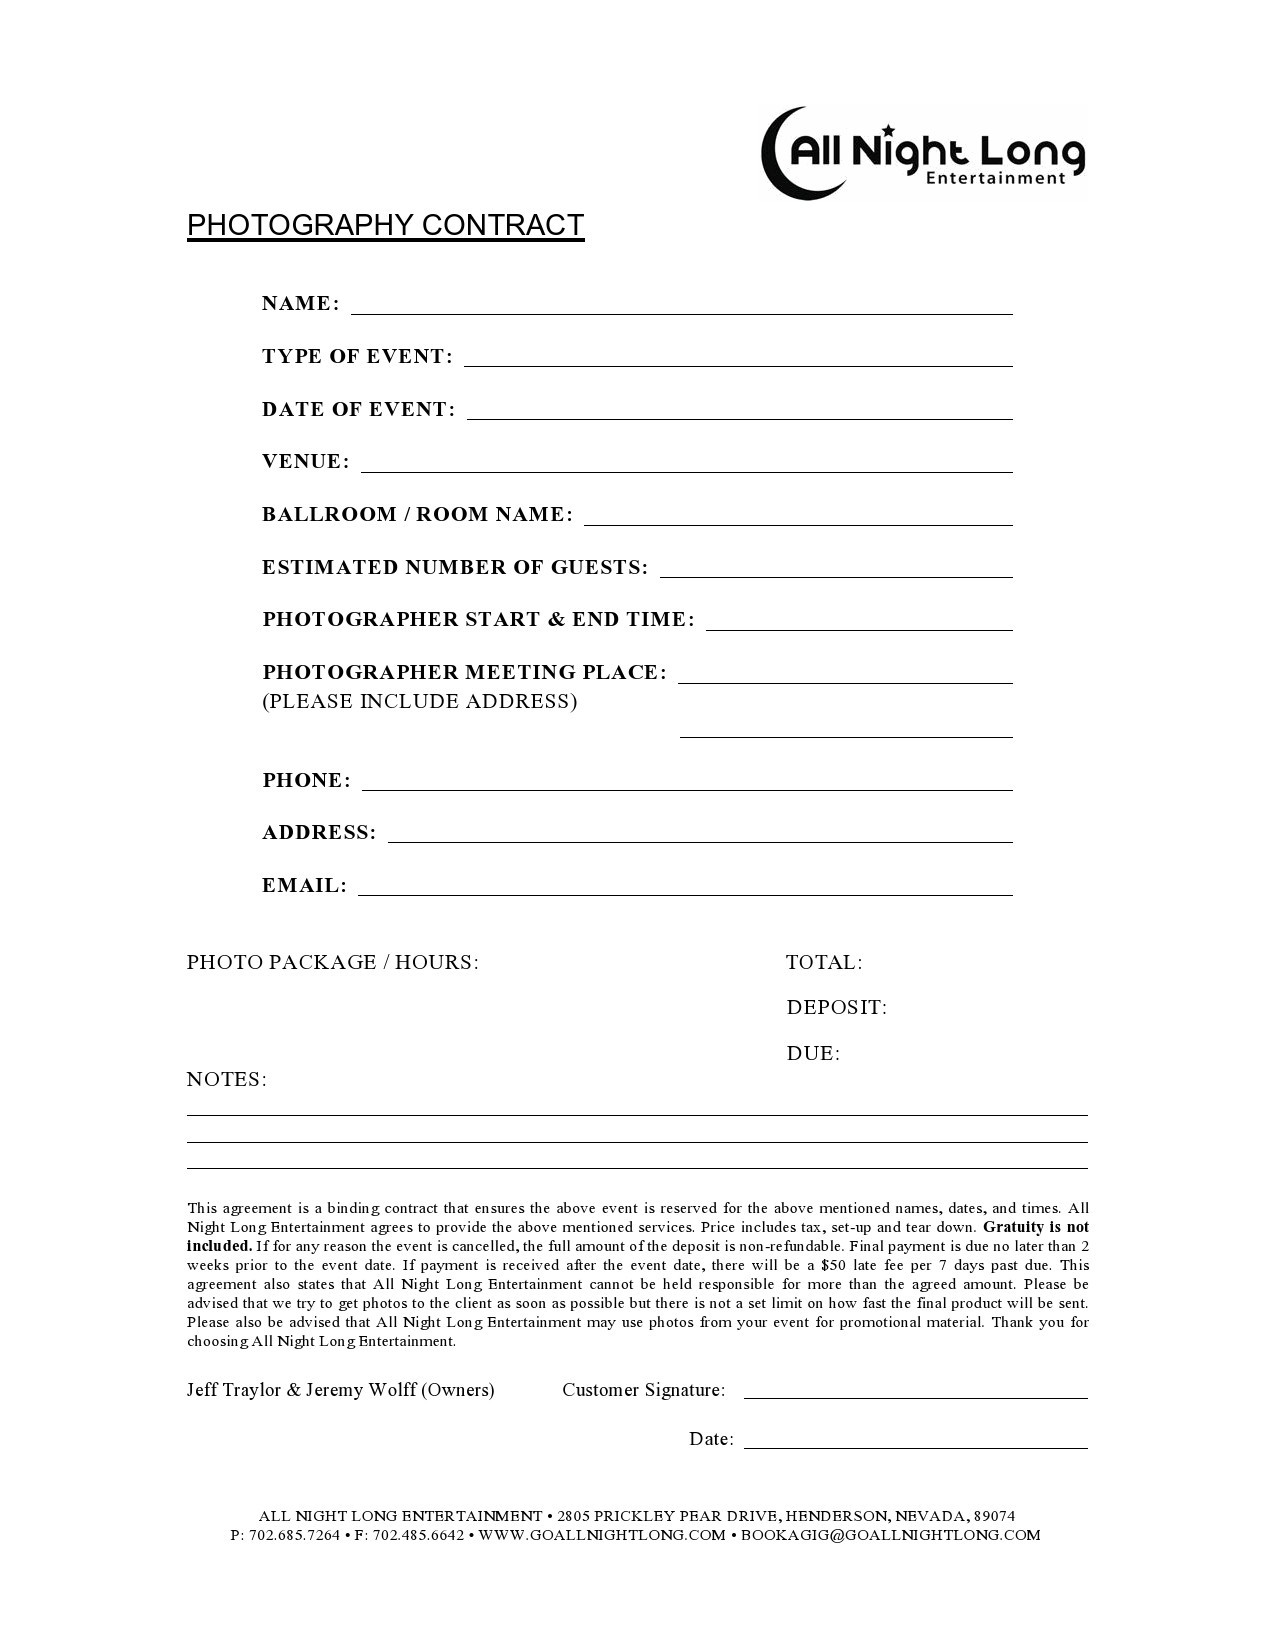 Free photography contract template 16